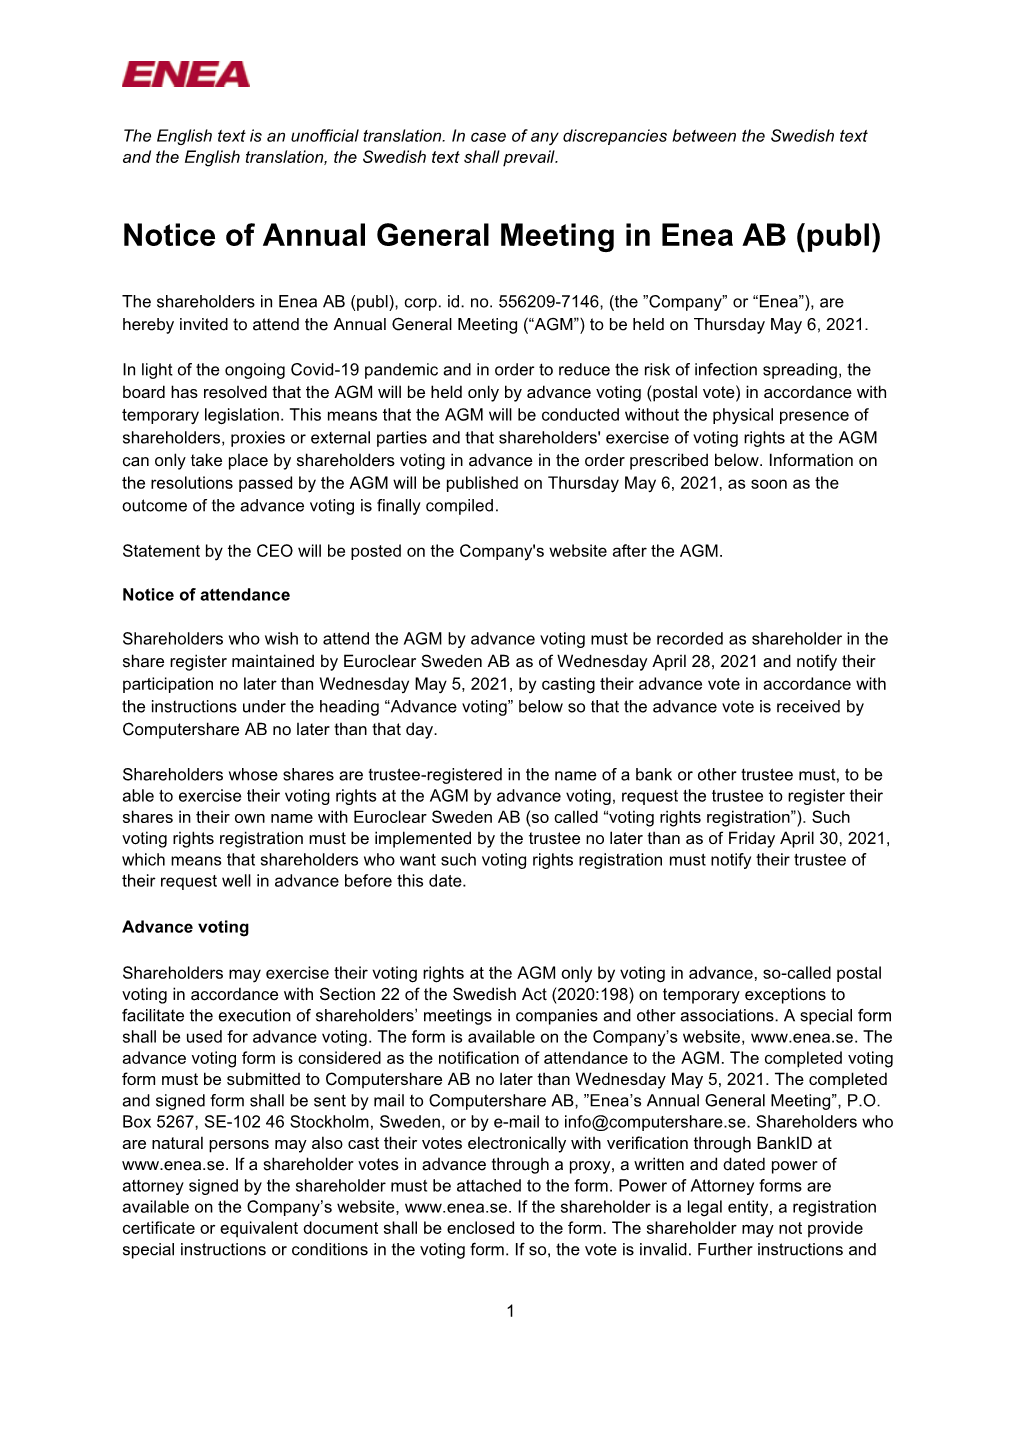 Notice of Annual General Meeting in Enea AB (Publ)